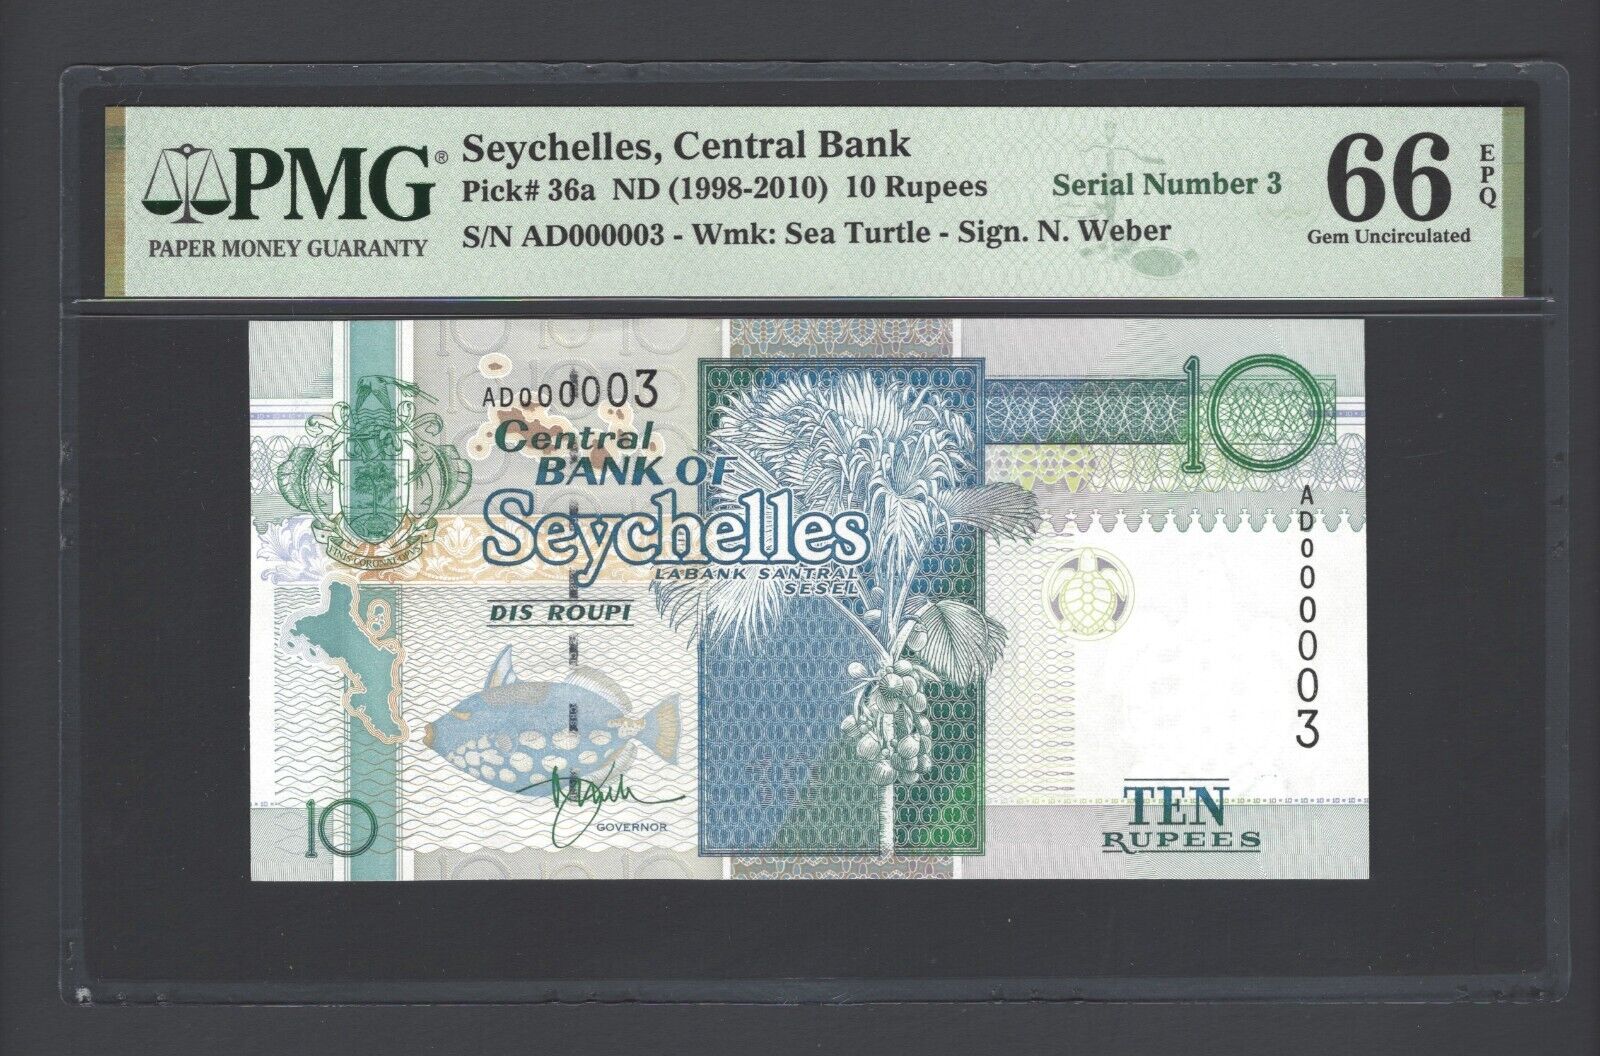 Seychelles 10 Rupees Nd(1998-2010) P36a N000003 Uncirculated Grade 66